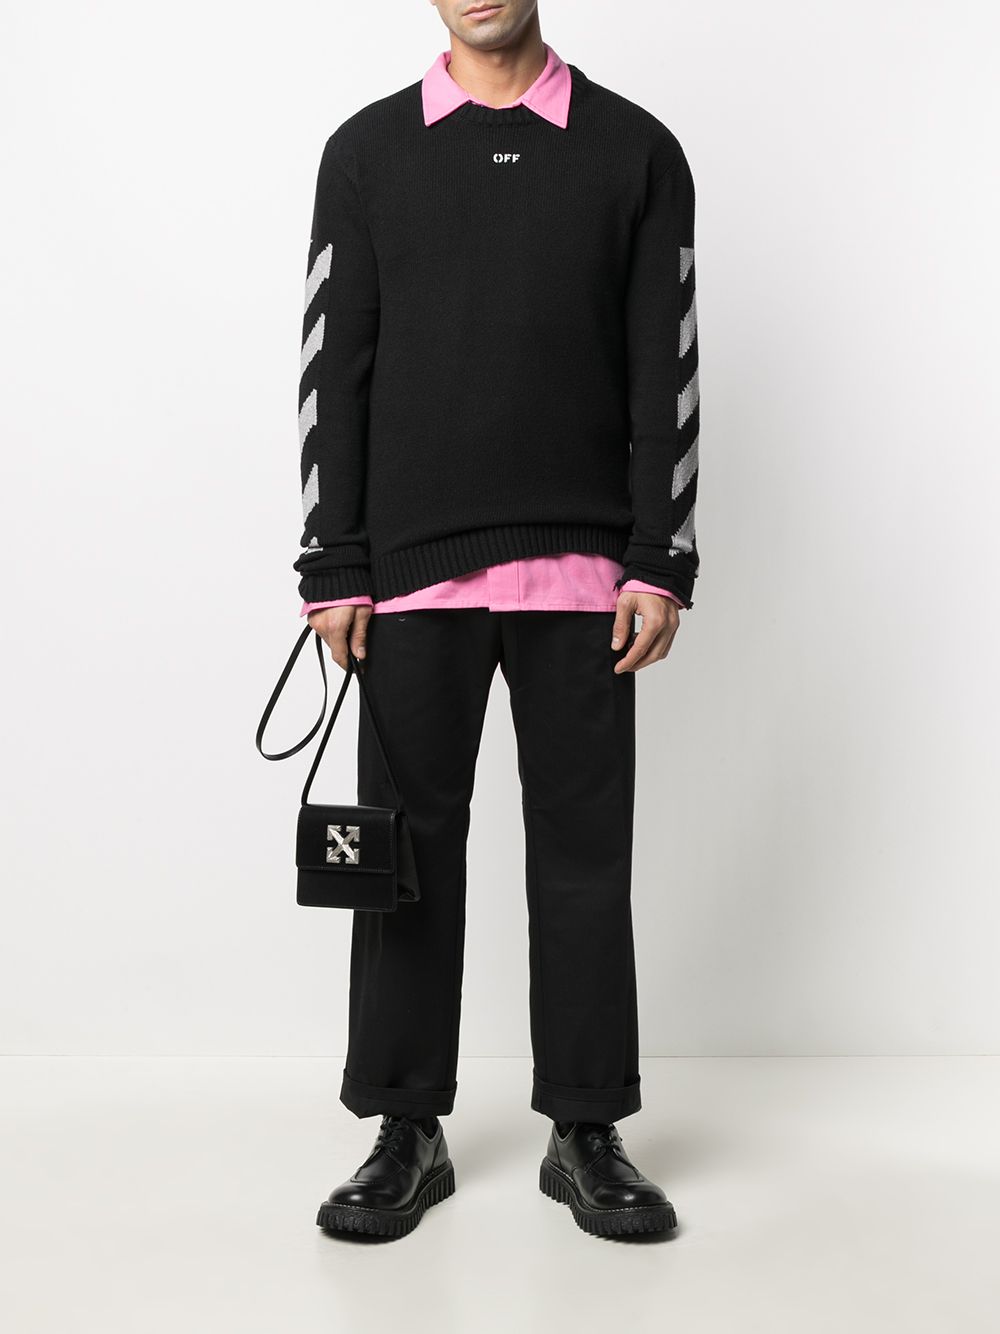 Shop Off-White logo-print striped jumper with Express Delivery - FARFETCH